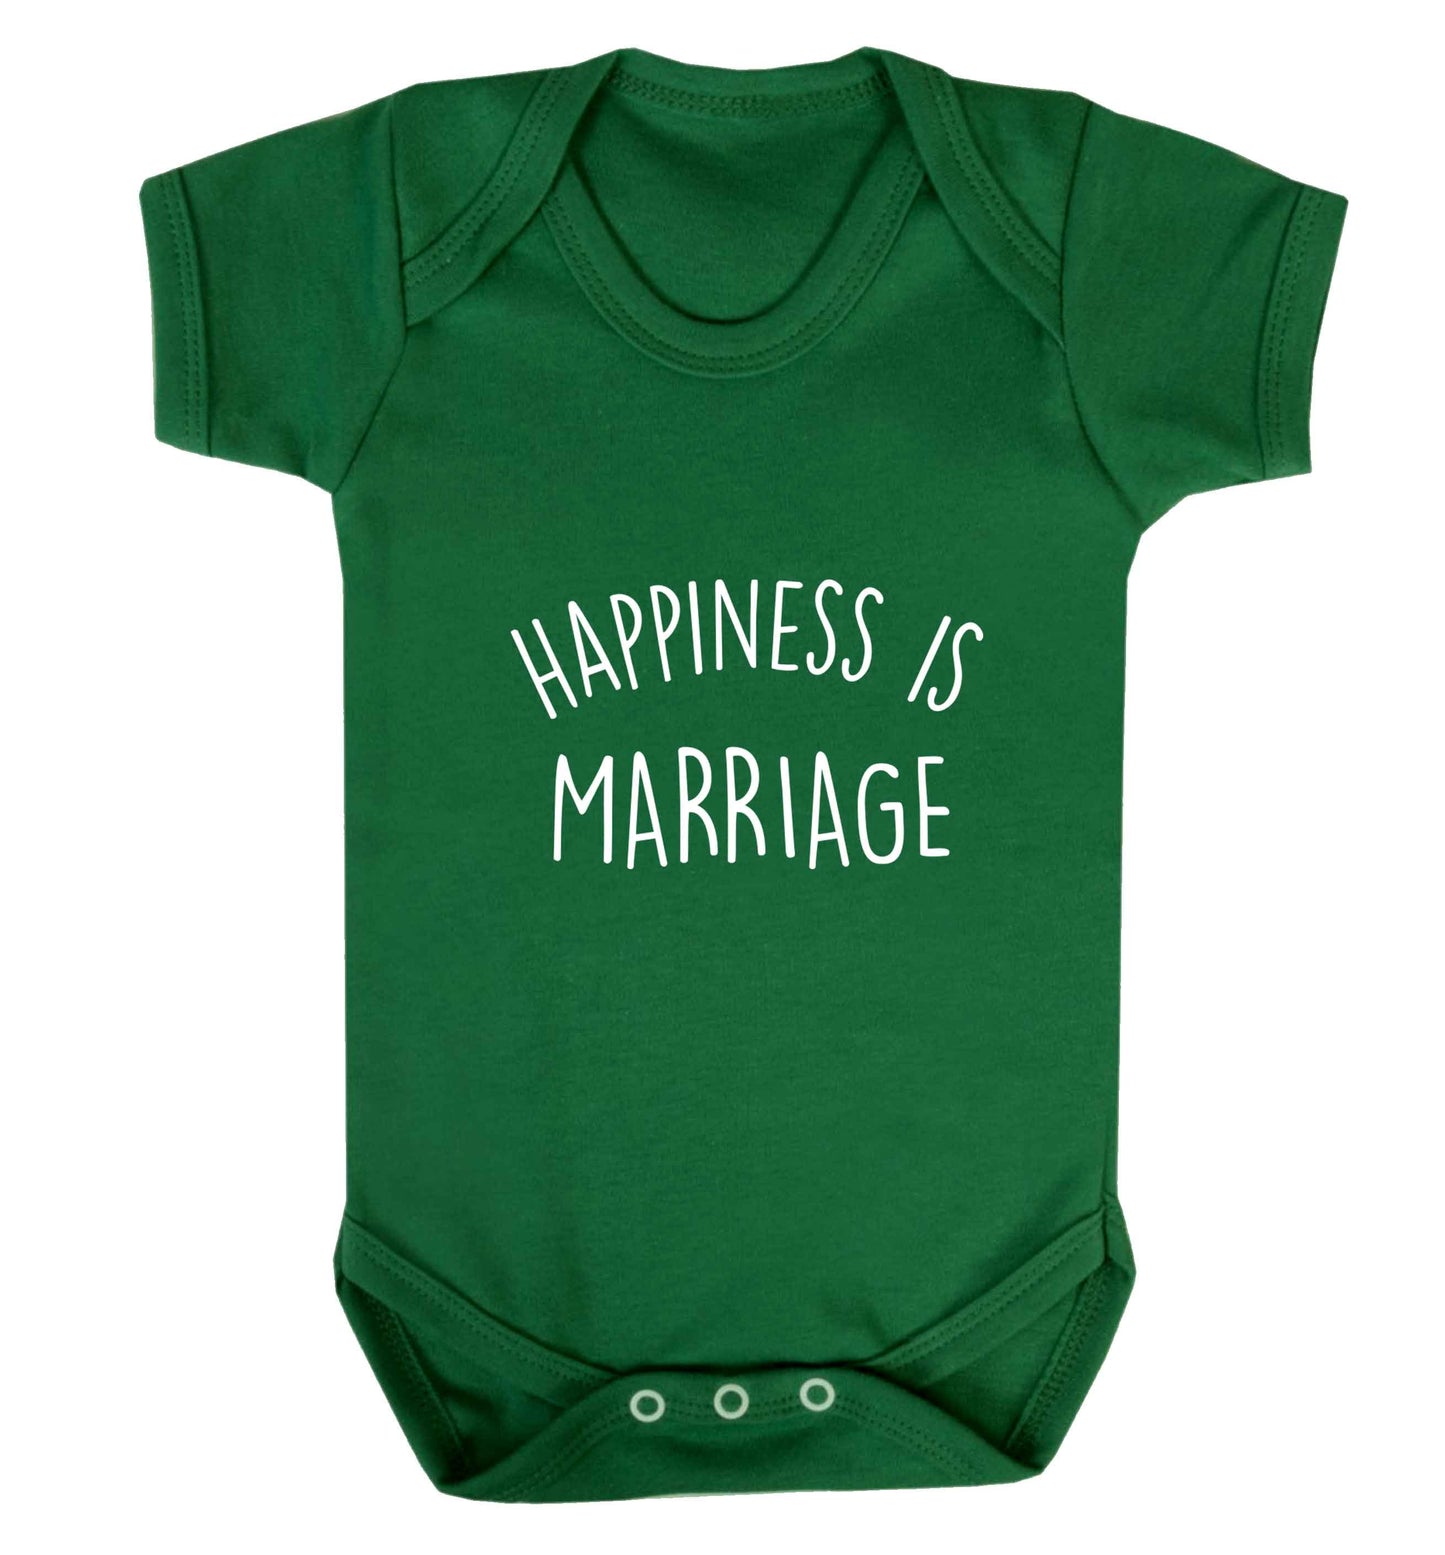 Happiness is marriage baby vest green 18-24 months